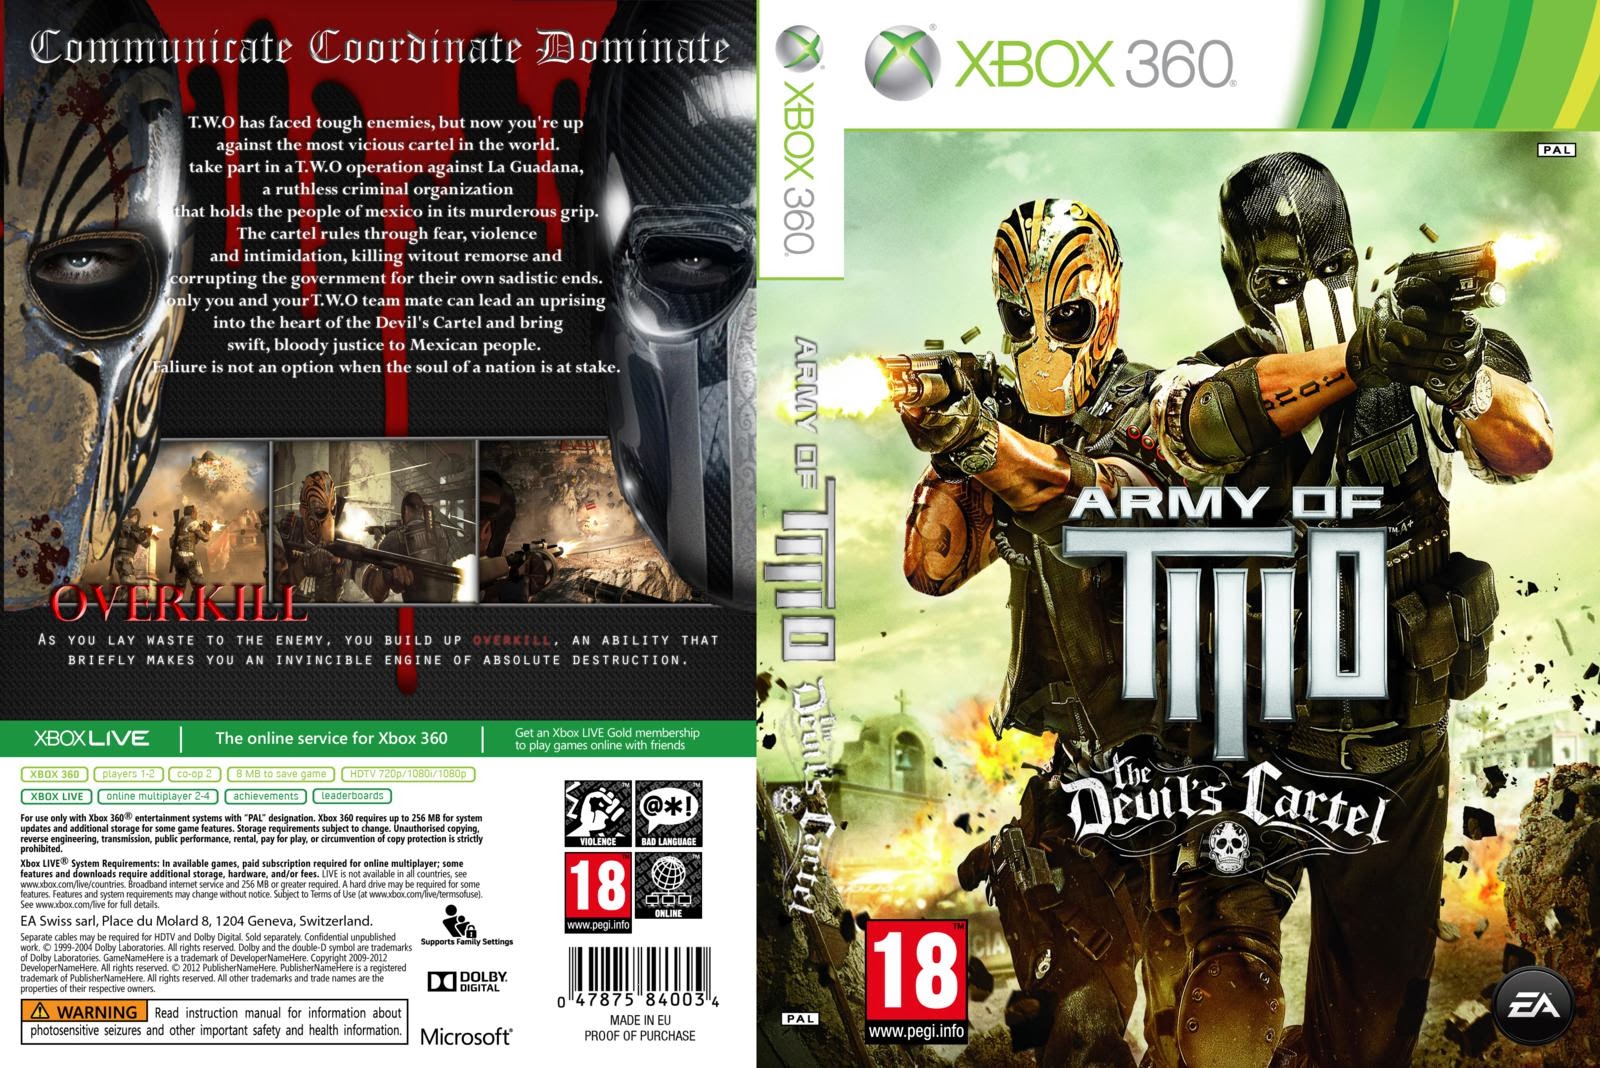 X xbox 360 игры. Army of two Xbox 360 обложка. Обложки к играм Xbox 360 Army of two. Army of two на Икс бокс 360. Xbox 360 игры для Xbox 360.